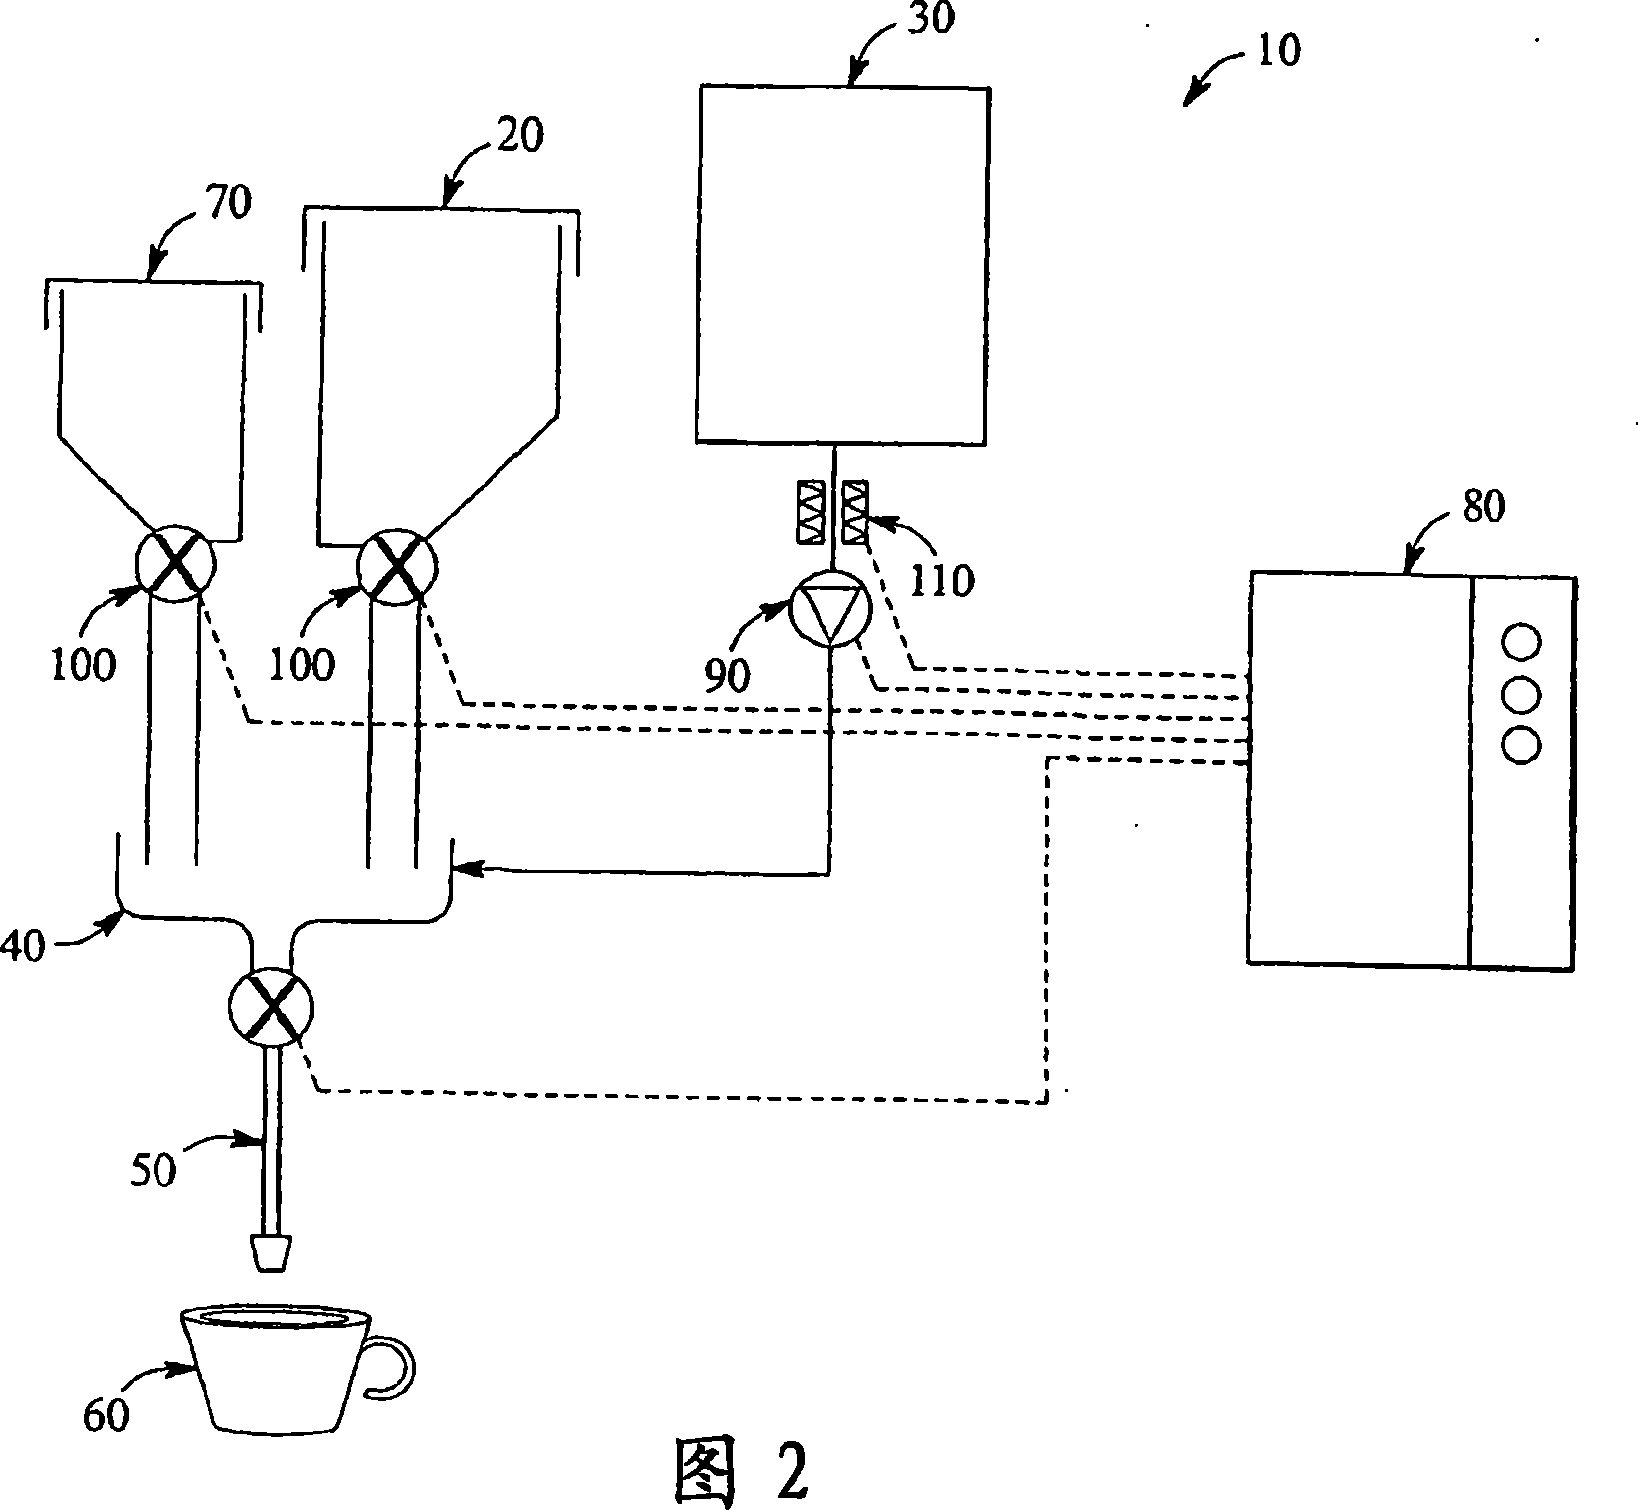 Methods and systems for delivering foamed beverages from liquid concentrates through a dispenser machine